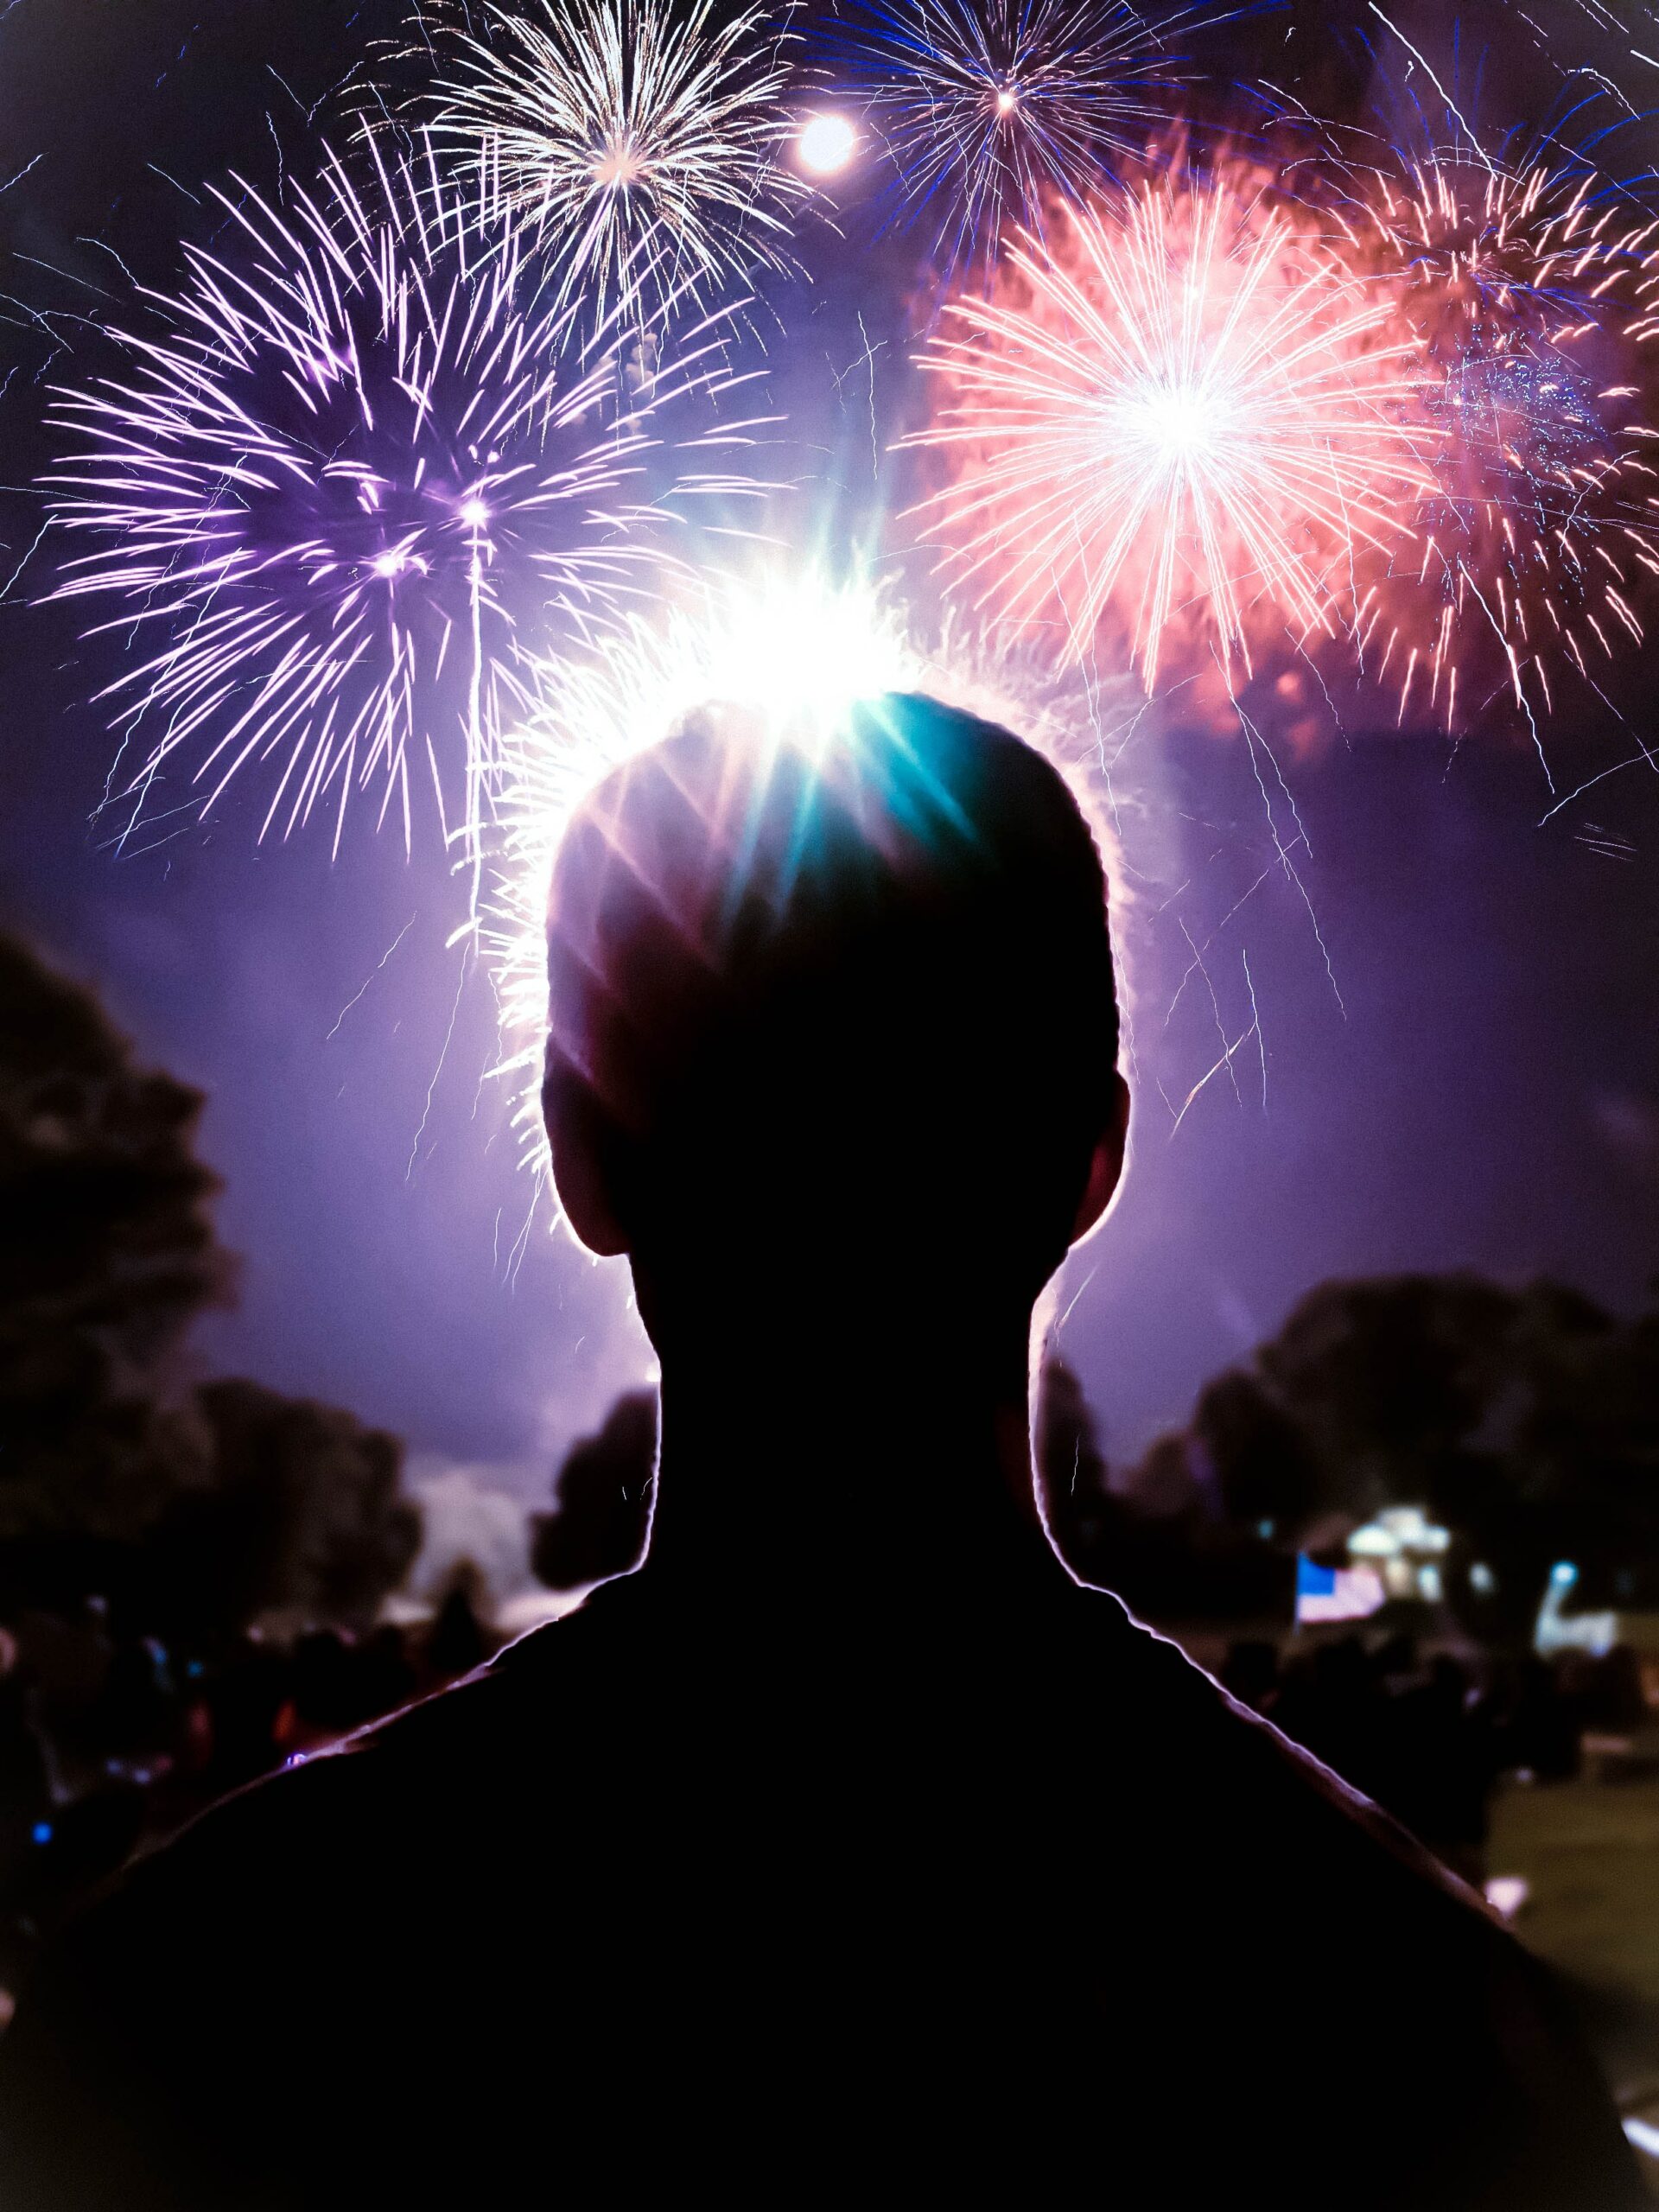 The silhouette of a body. Above their head: fireworks. below: tree silhouettes against the night sky